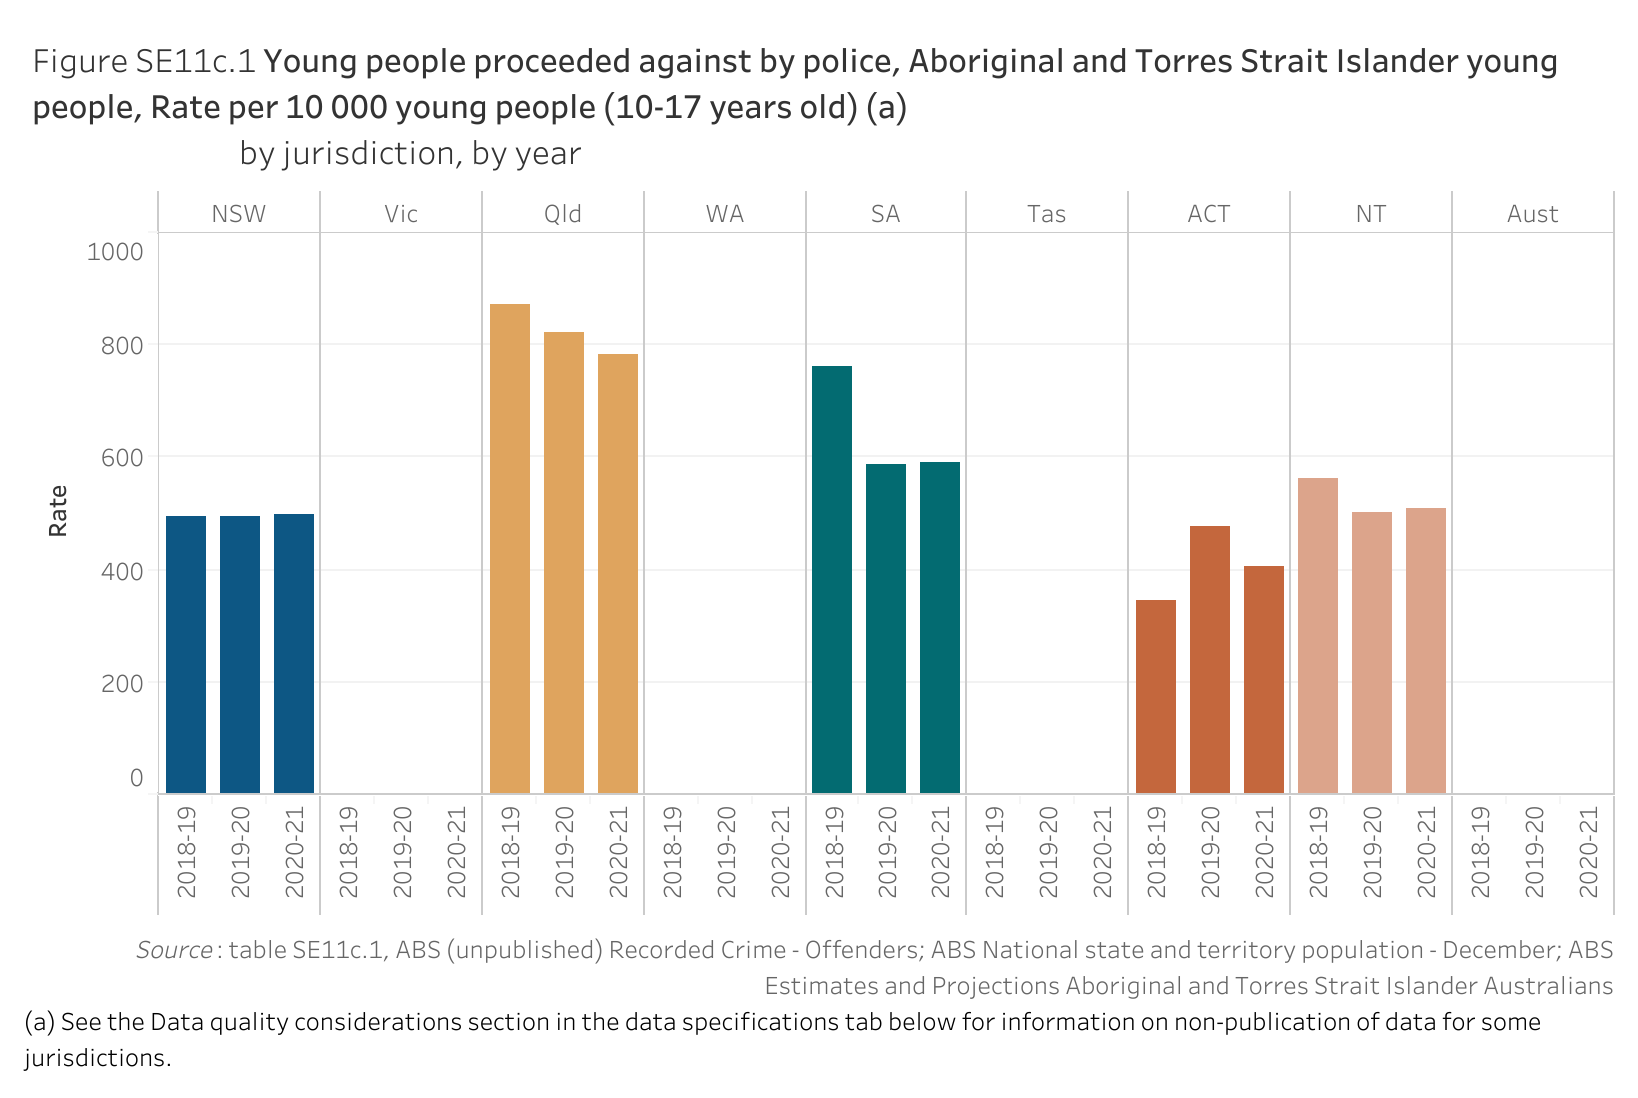 Figure SE11c.1. Bar chart showing the rate of Aboriginal and Torres Strait Islander young people (10-17 years old) proceeded against by police per 10 000 young people, by jurisdiction and by year. Data table of figure SE11c.1 is below.